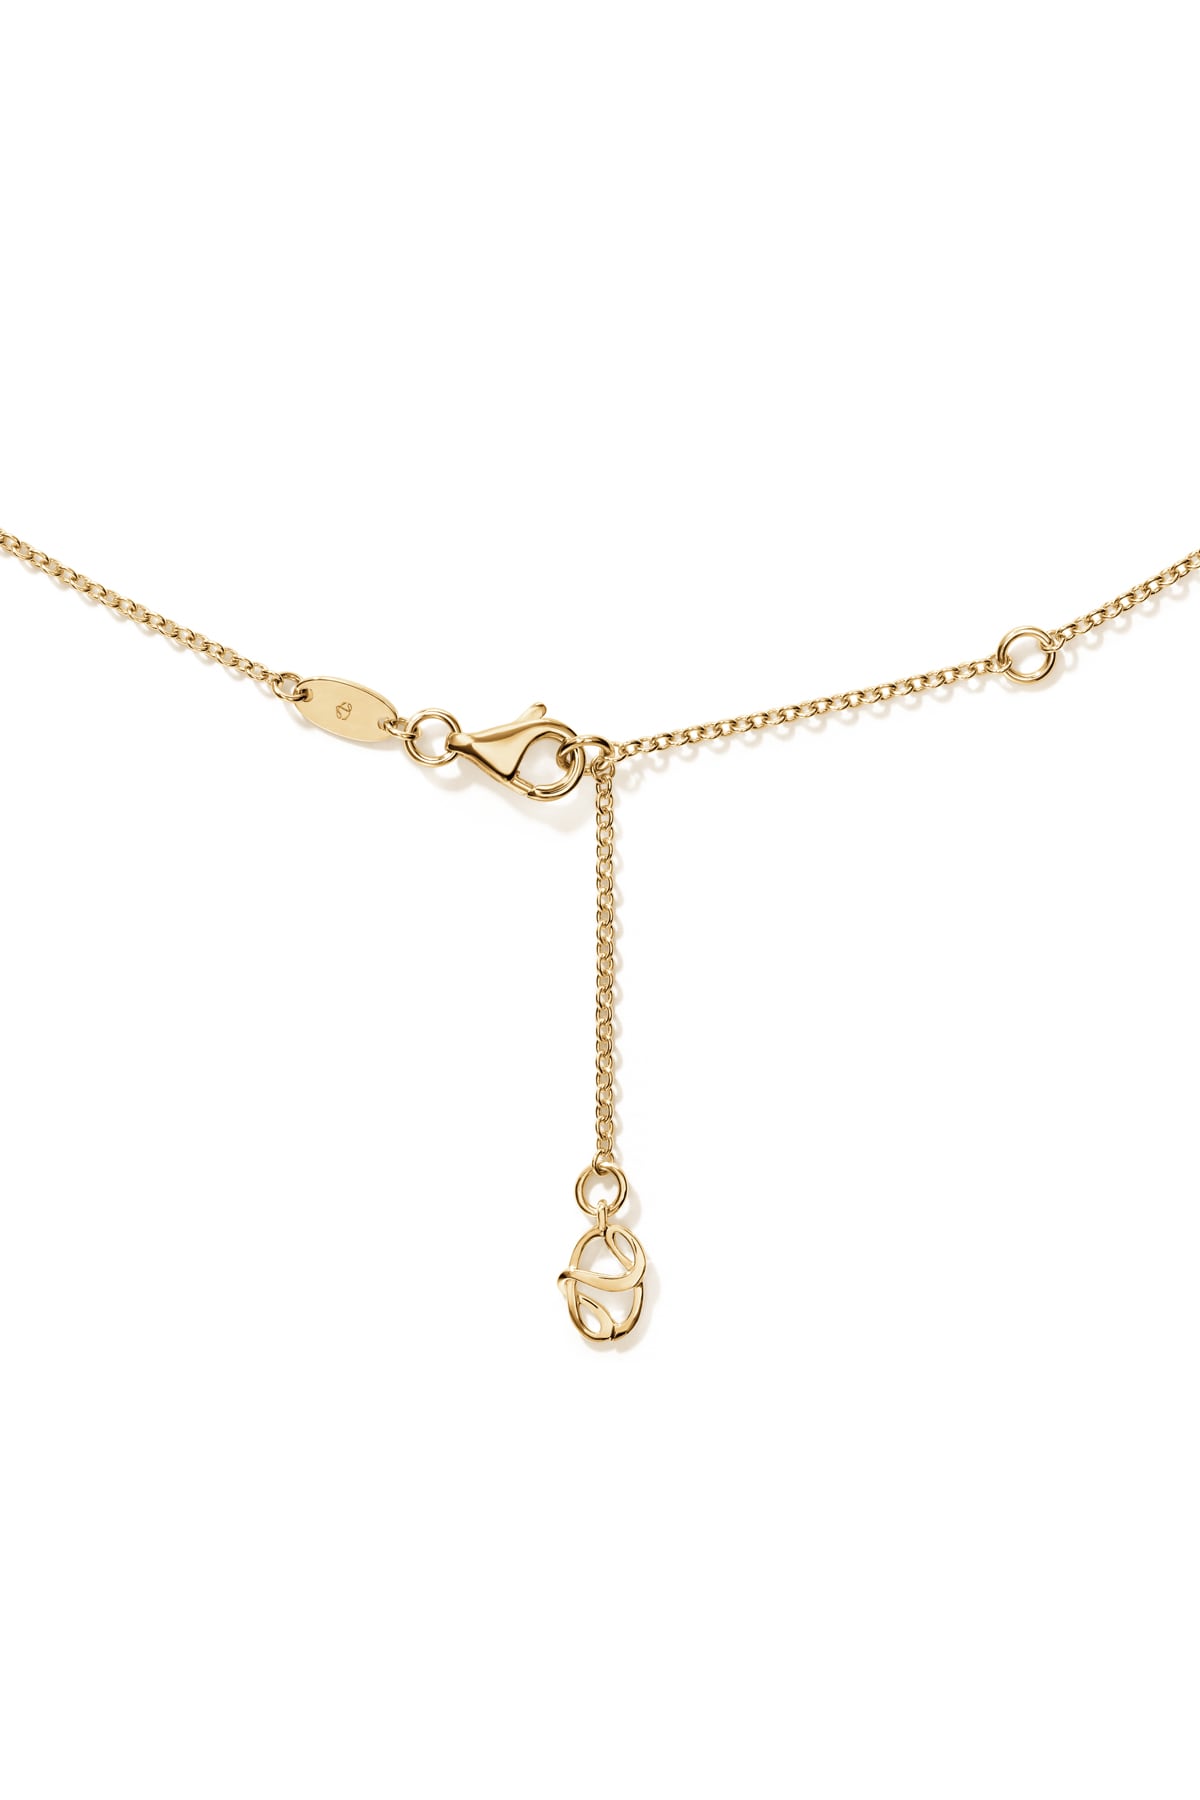 Barre Floating Diamond Pave Pendant Necklace from Hearts On Fire from LeGassick Jewellery Gold Coast, Australia.